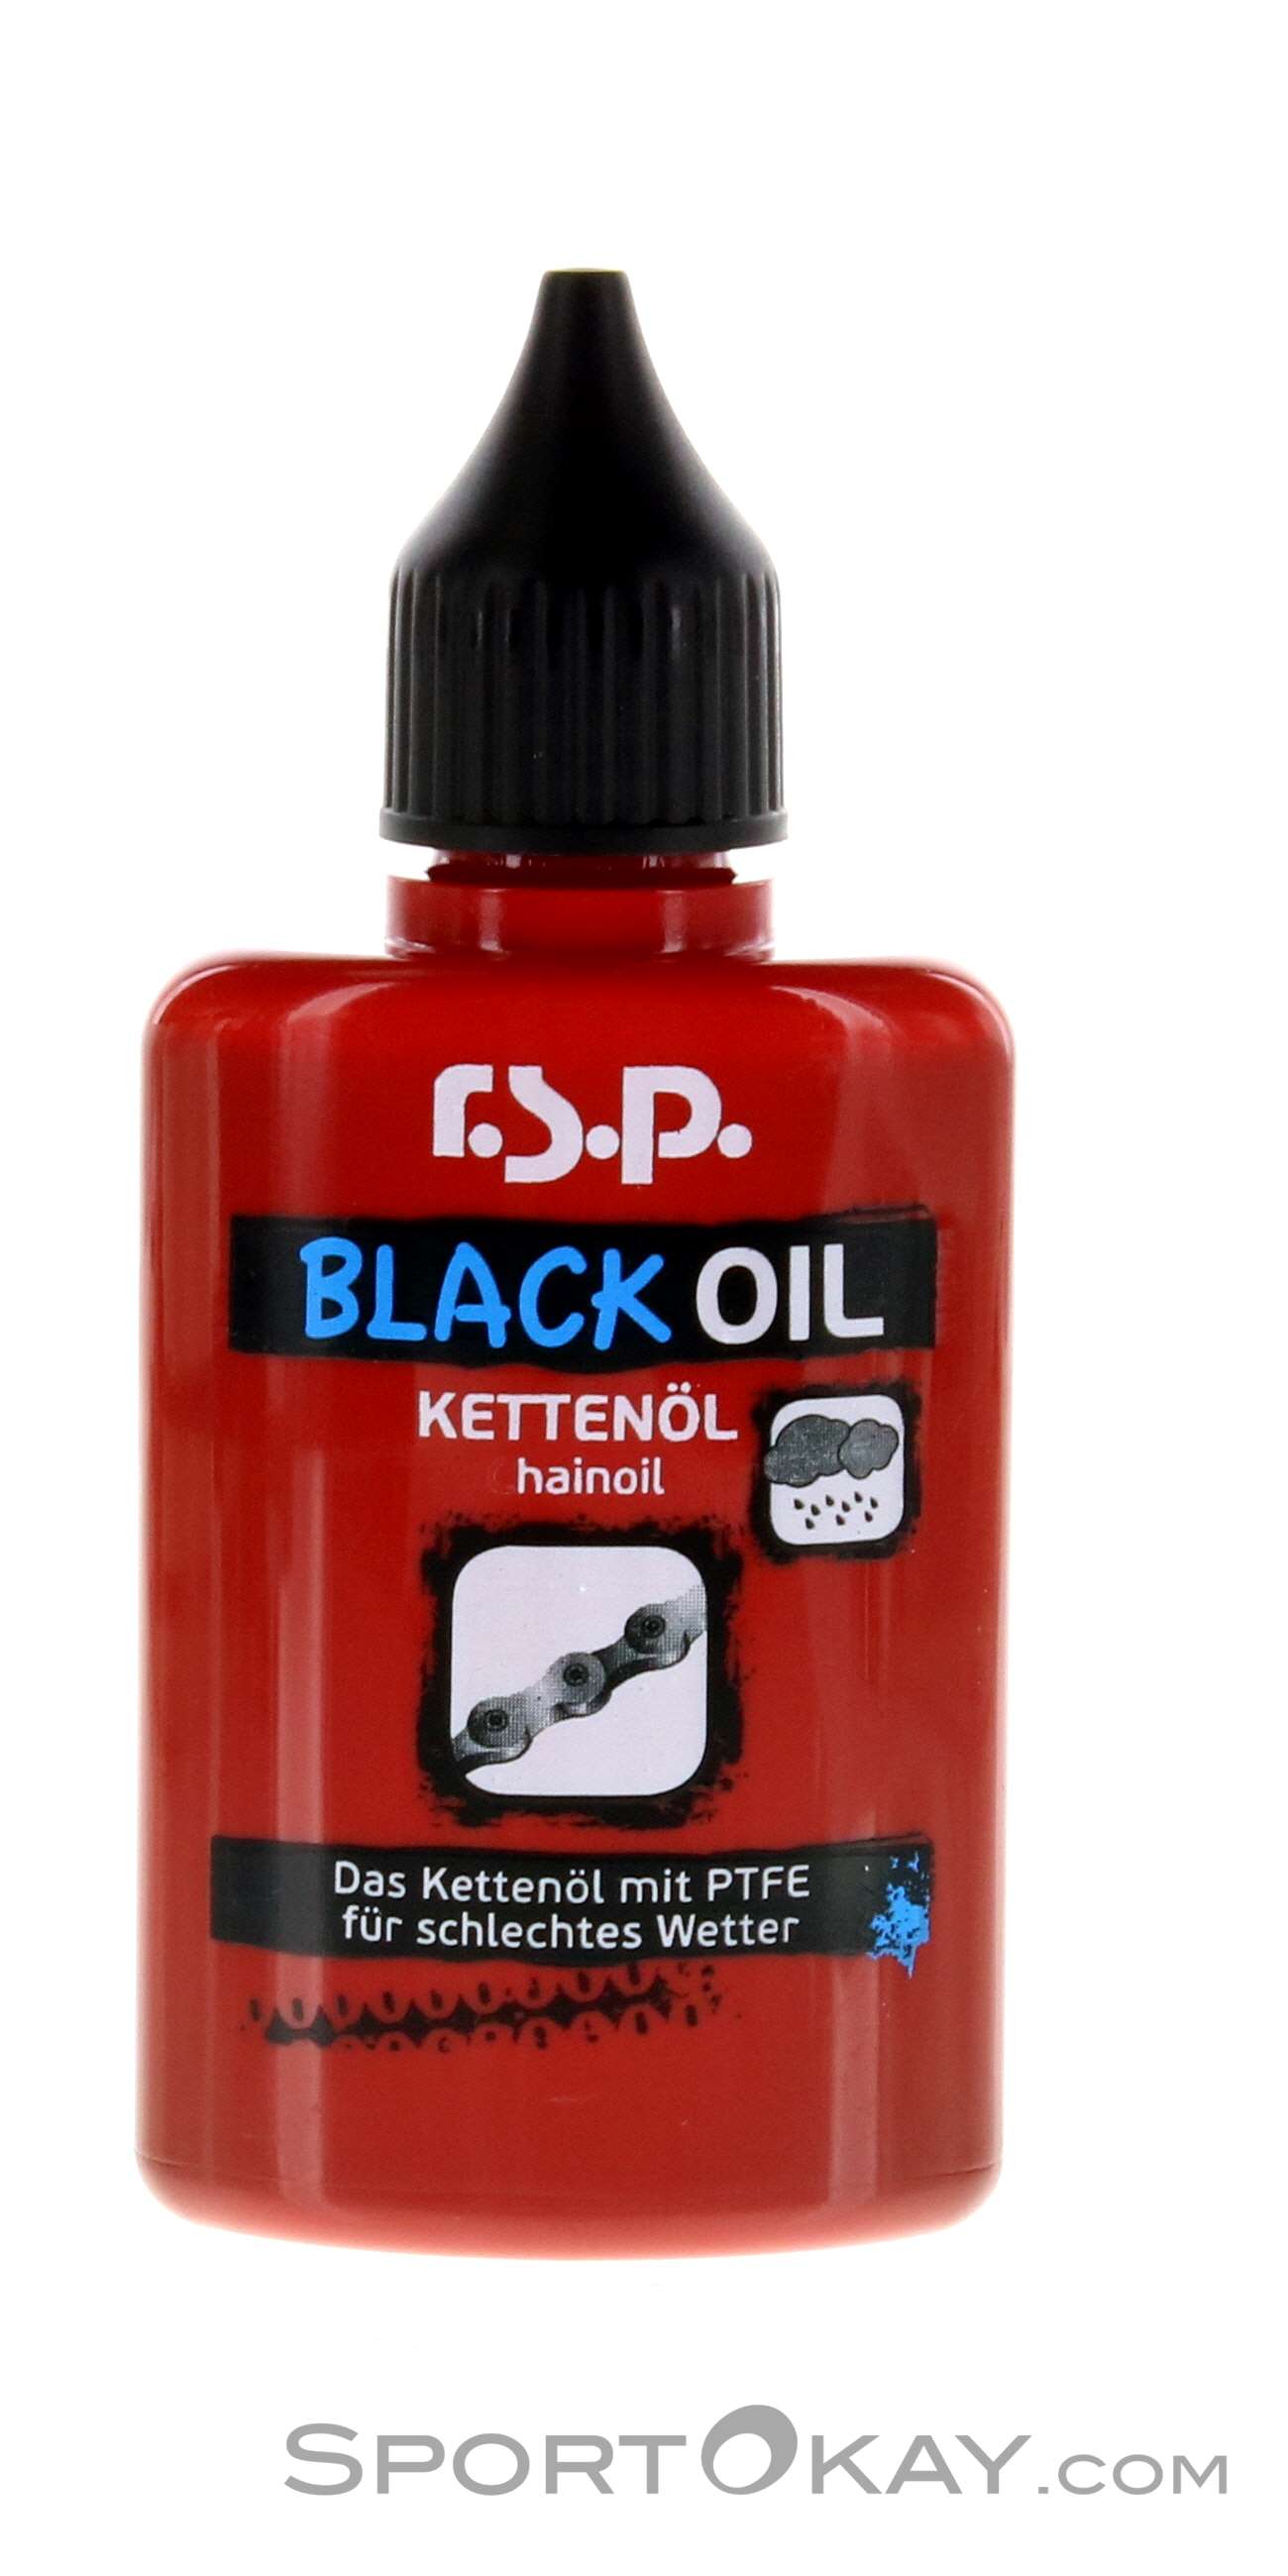 r.s.p. Black Oil 50ml Chain Lubricant - Lubricants - Tools & Care